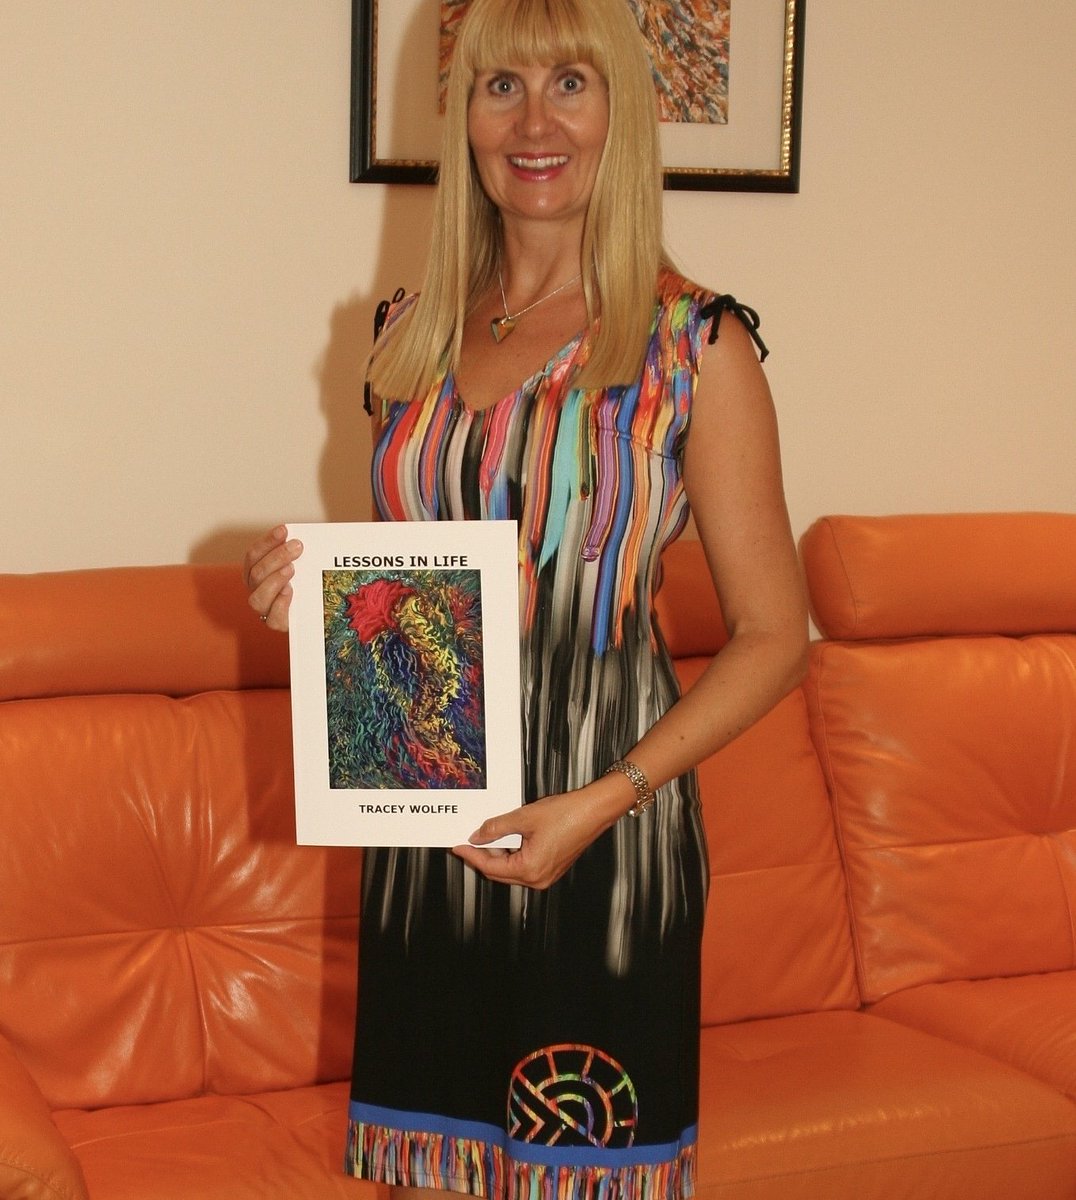 Orders for Christmas started today! Contact me to reserve your copy of Lessons in Life: traceywolffe@aol.com 
#uplifting
#lessonsinlife 
#positiveaffirmations
#spiritualart 
#colourfulpaintings